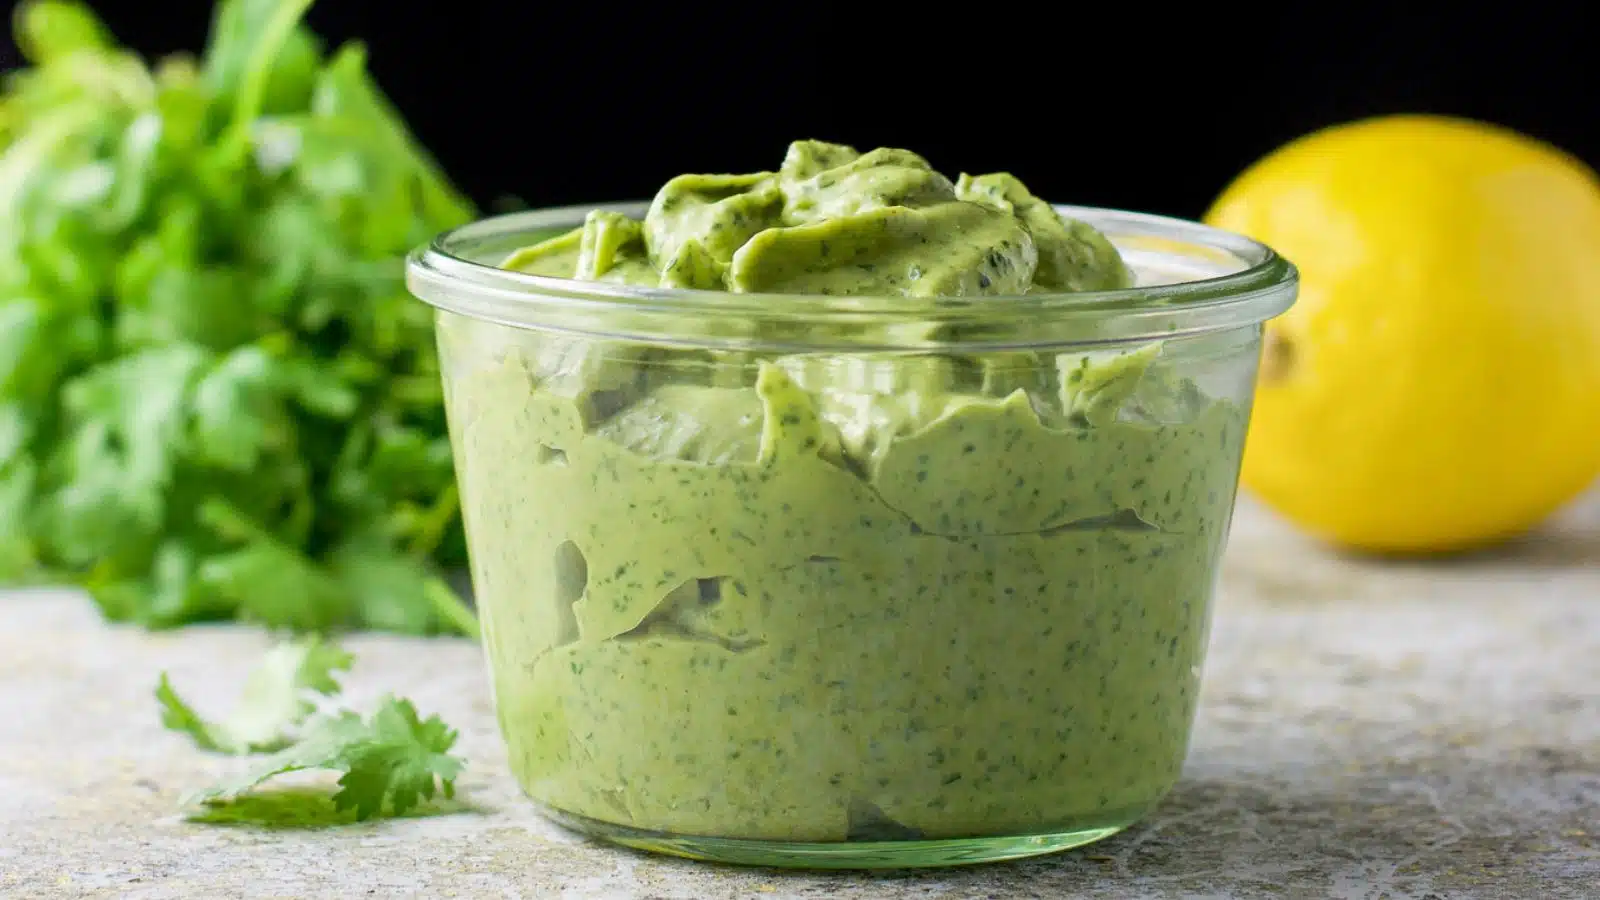 A wide mouthed glass jar with a green dip in it with cilantro and a lemon in the back